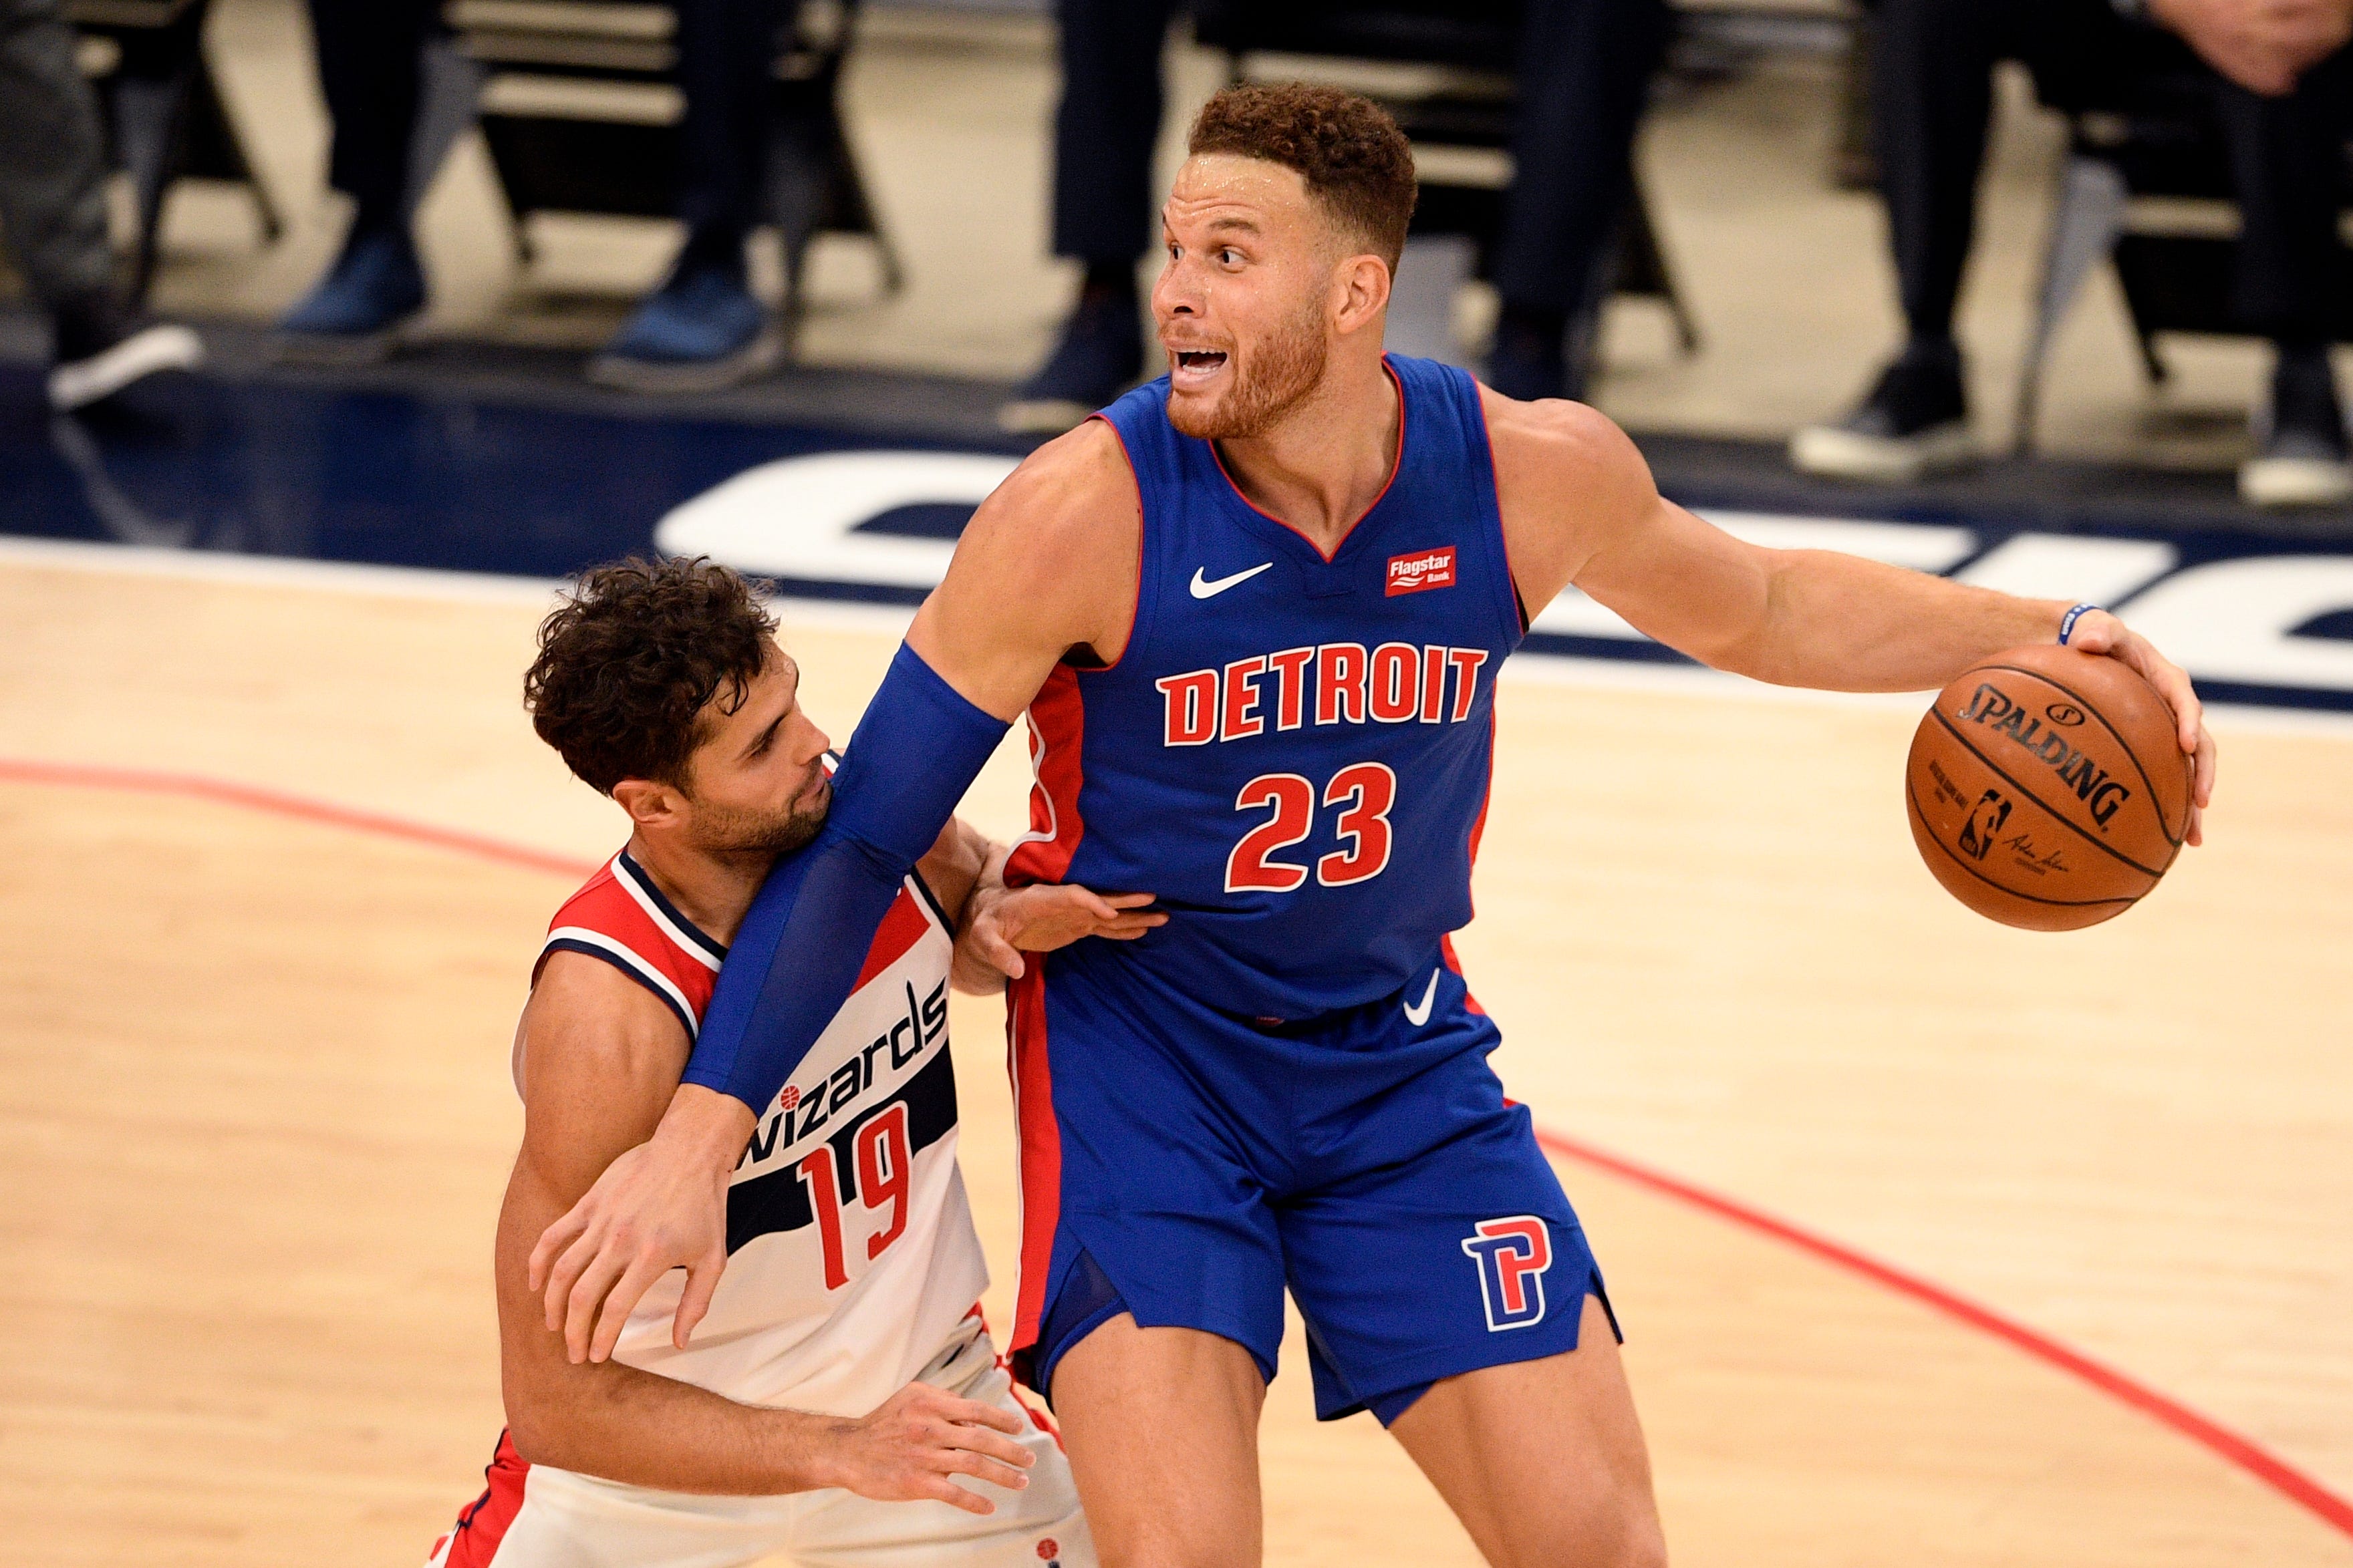 Detroit Pistons forward Blake Griffin (23) dribbles the ball next to Washington Wizards guard Raul Neto (19) during the second half.